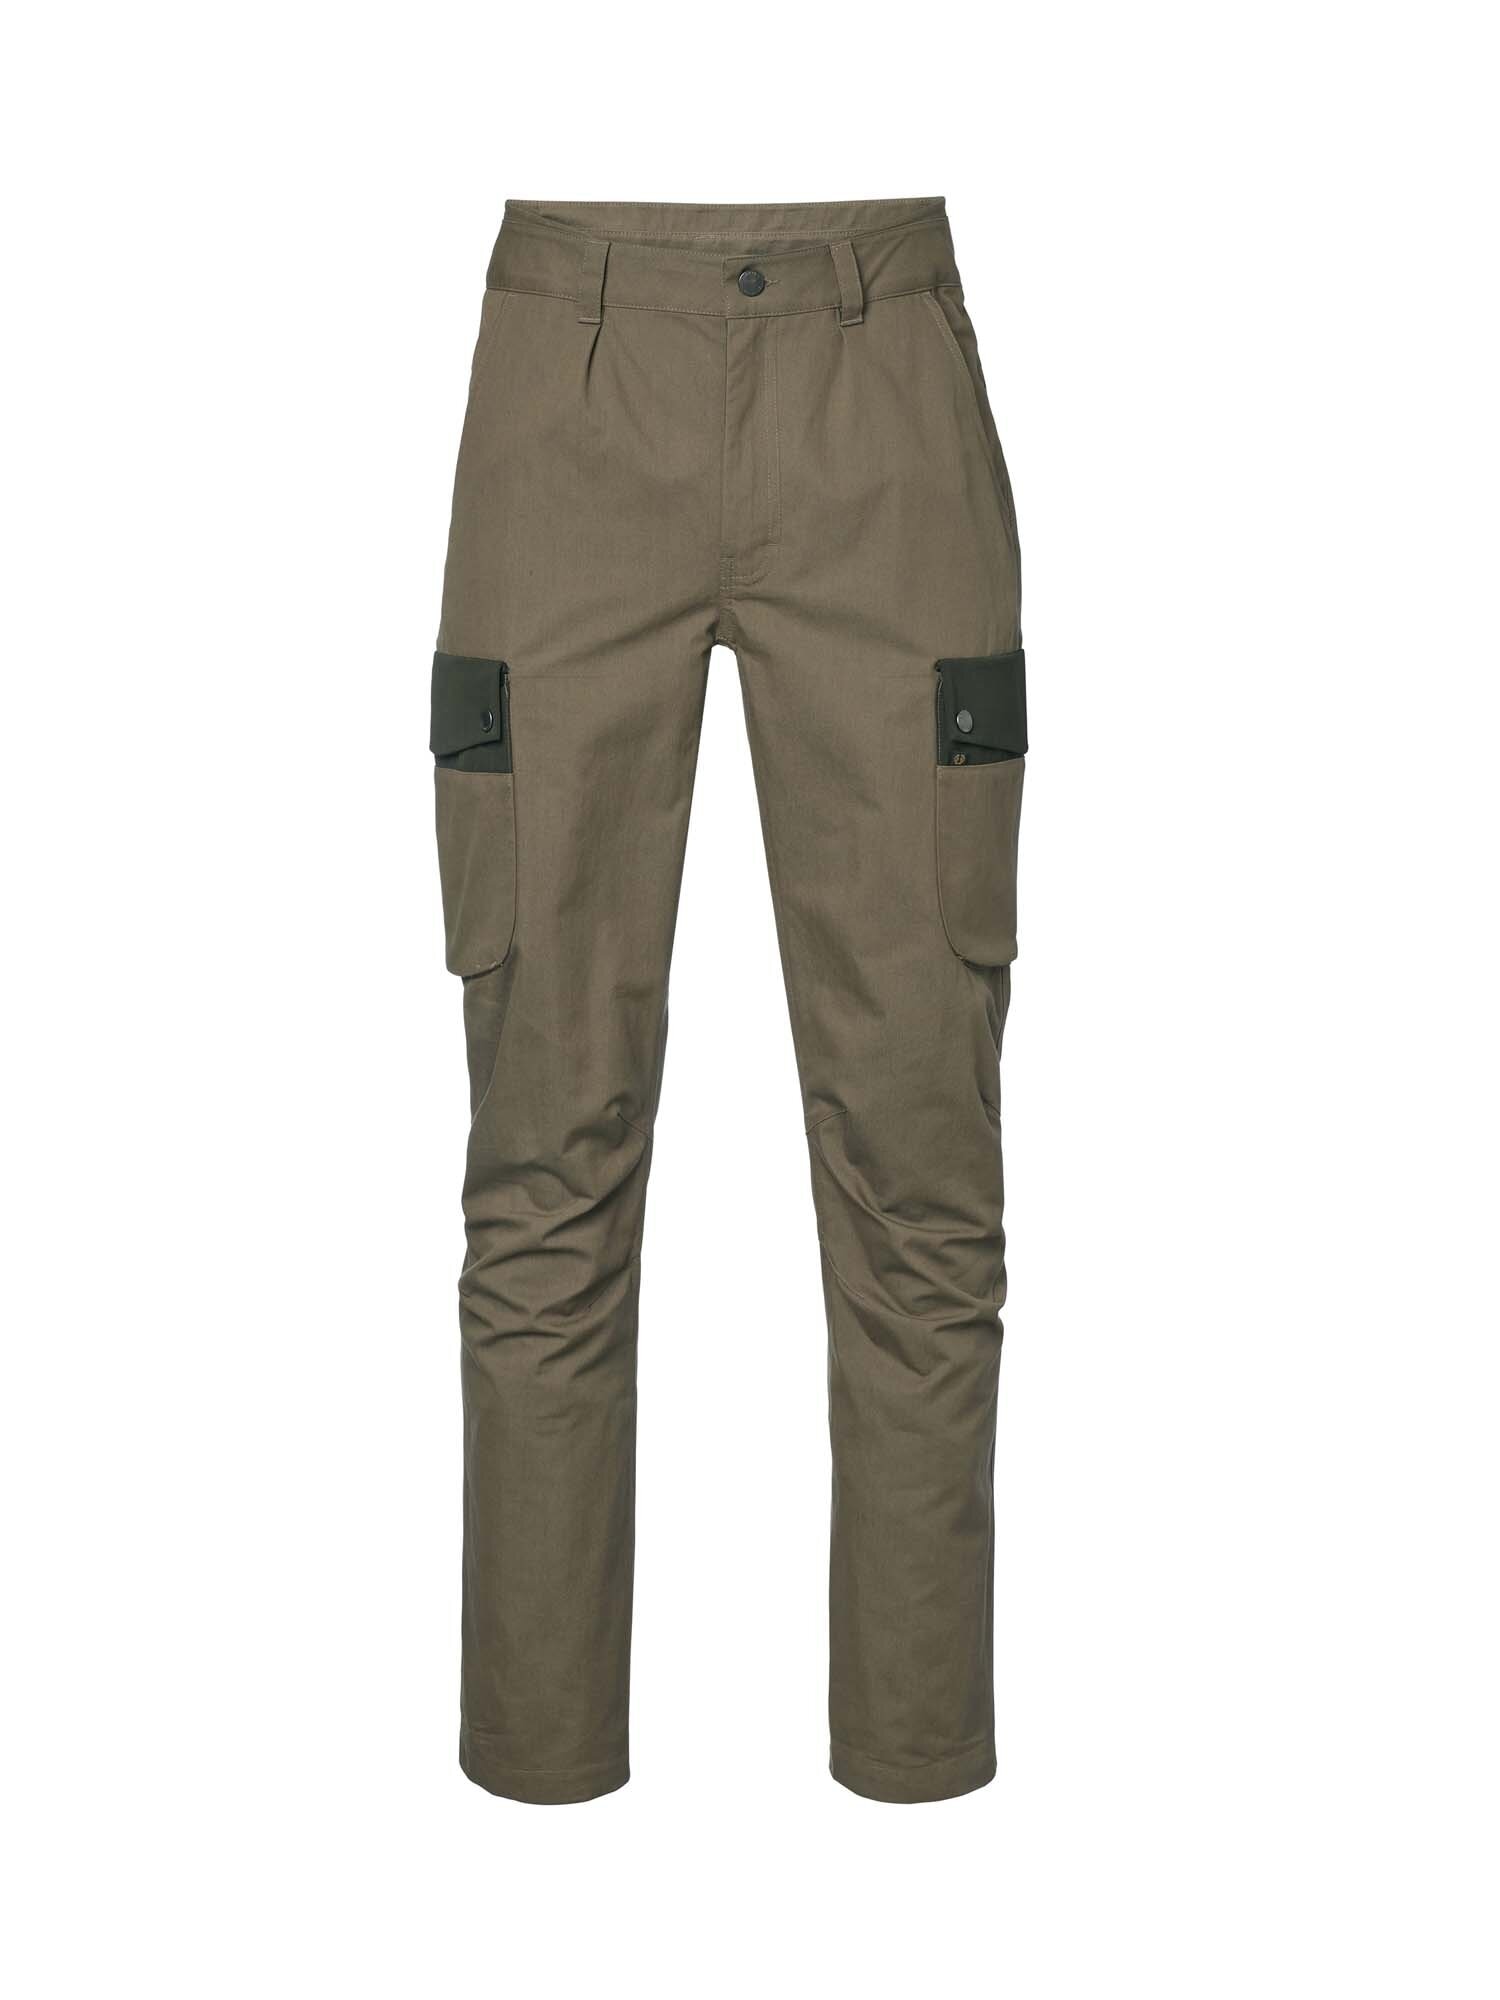 practical Hunting Pants Graff 761 Olive; Hiking Pants Mens; Hunting Trousers NEW 